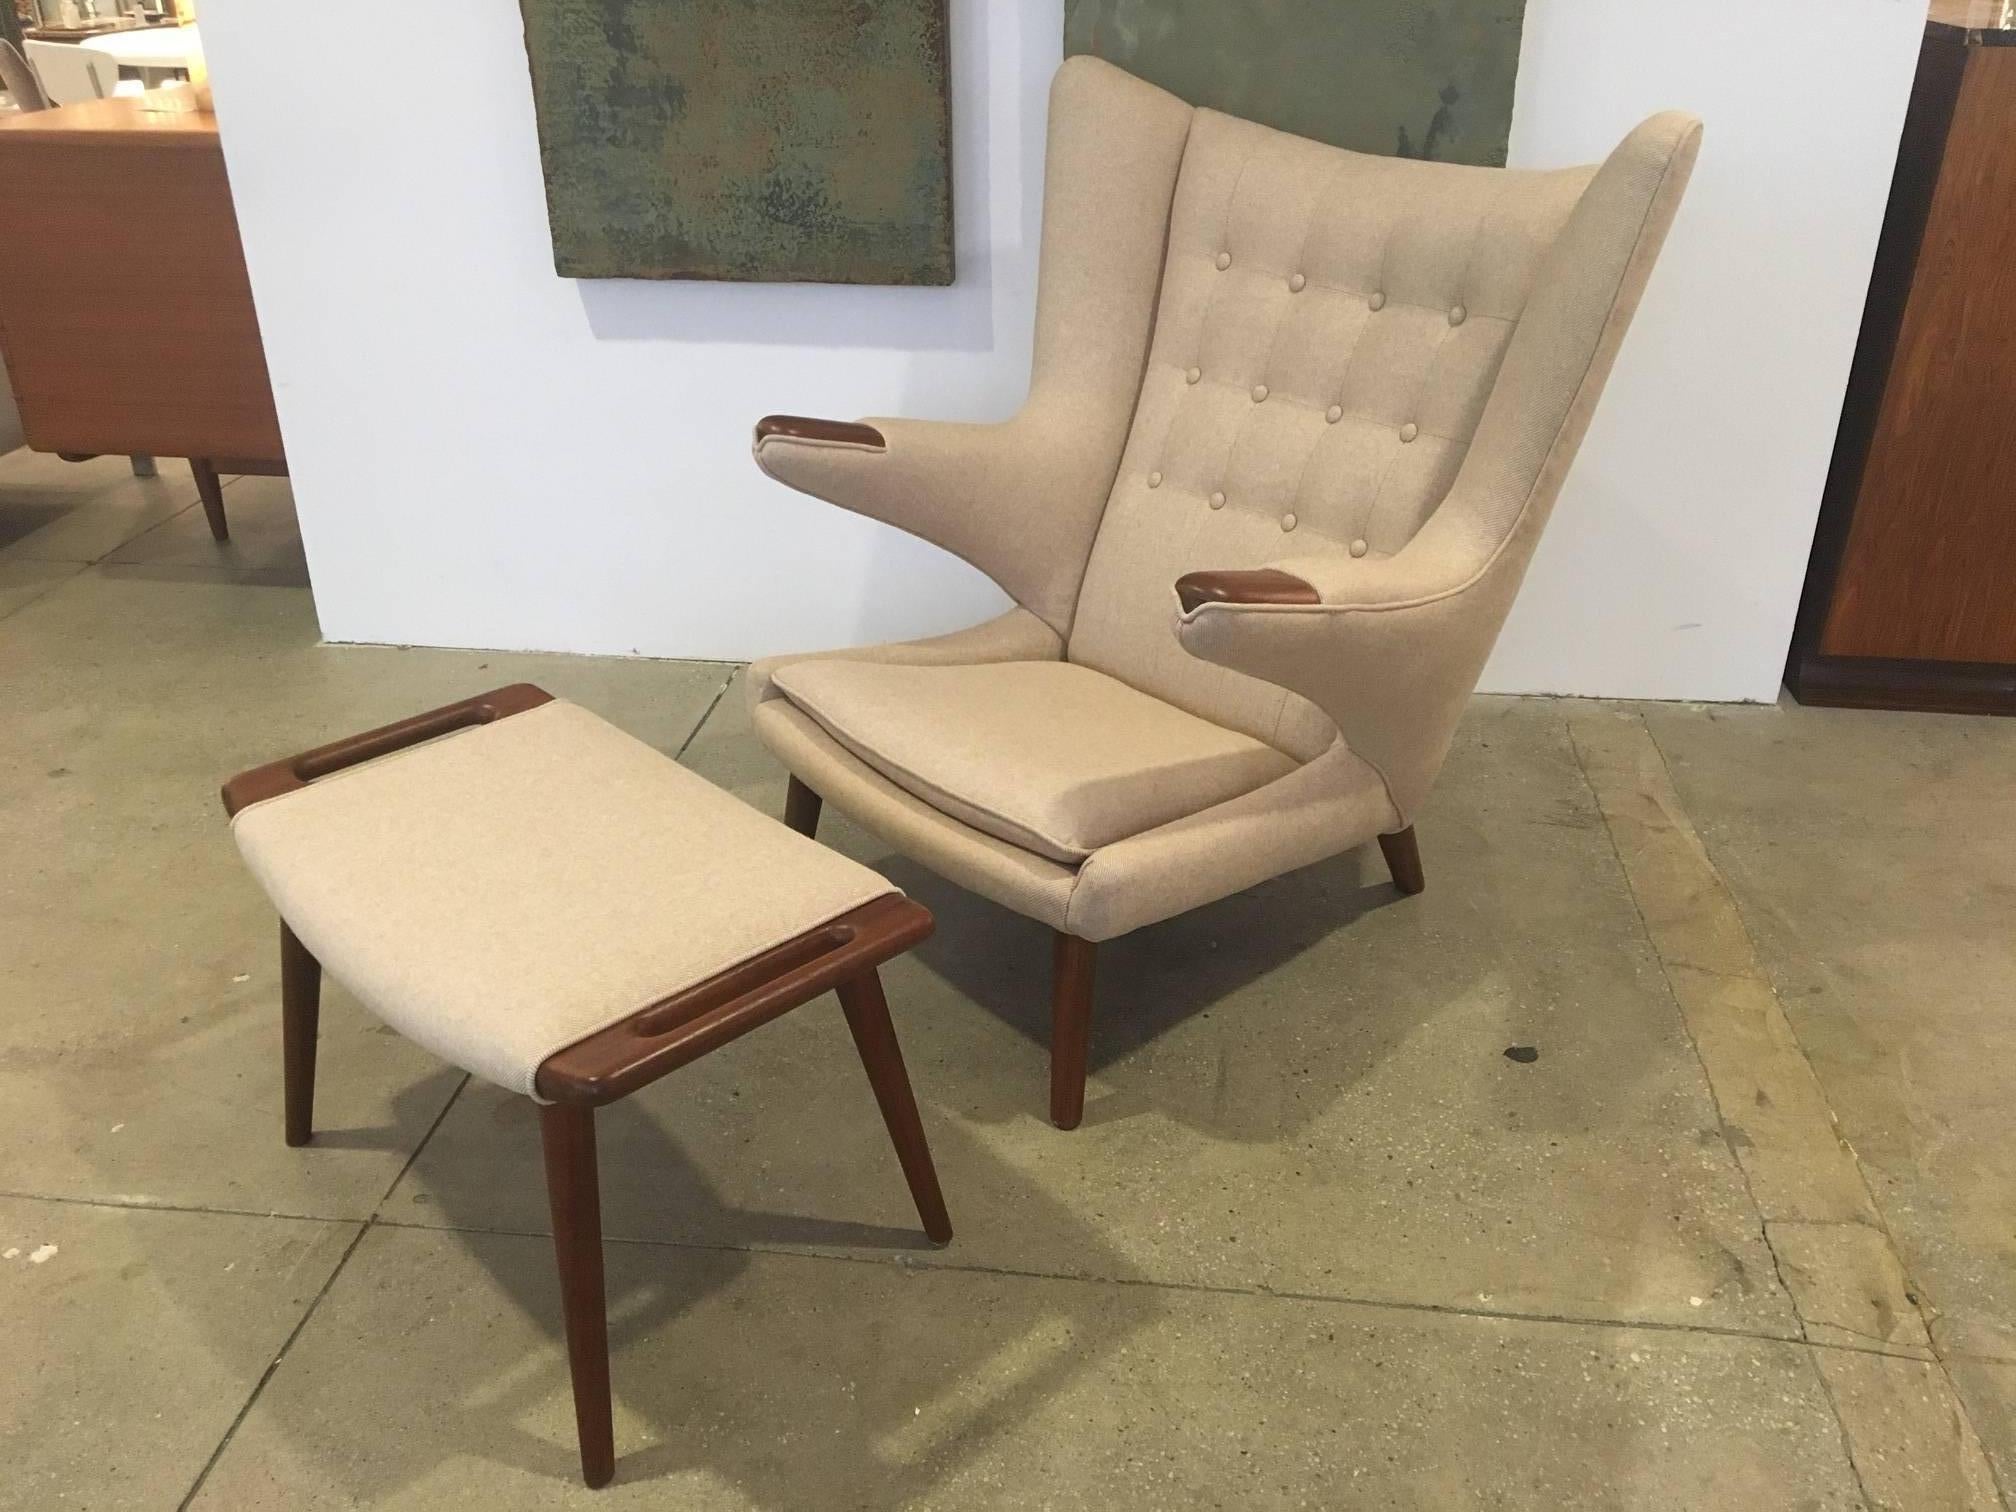 An original Papa Bear chair and stool by Hans Wegner, designed in 1951 and manufactured by AP Stolen as model AP19.
Both chair and stool have been newly upholstered in light beige herring bone wool fabric and polished with teak oil.  The stool